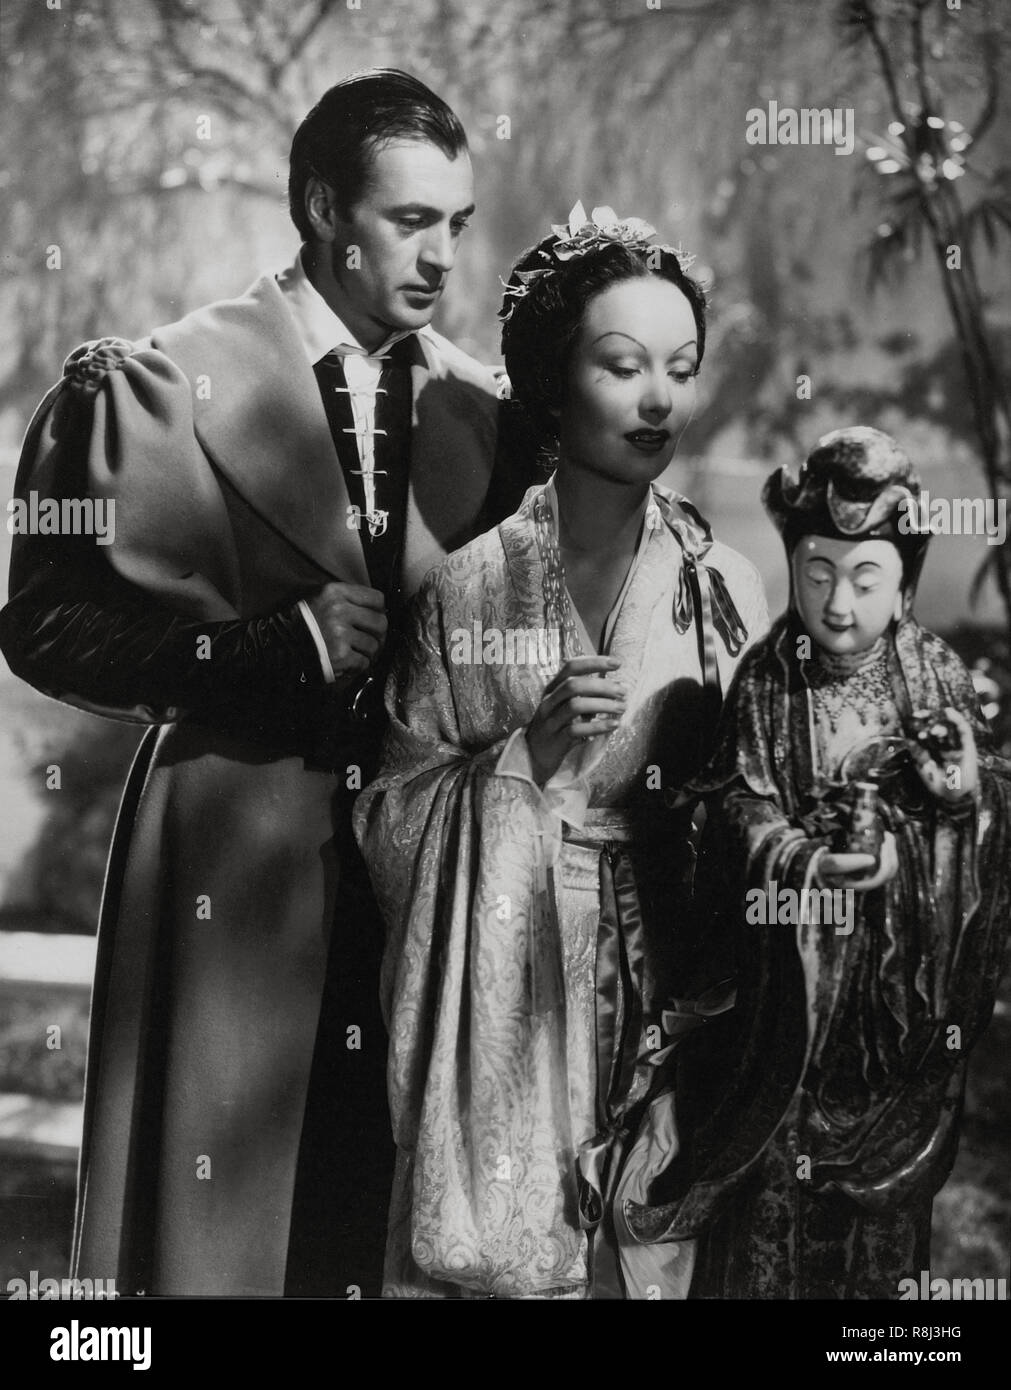 Original film title: THE ADVENTURES OF MARCO POLO. English title: THE  ADVENTURES OF MARCO POLO. Year: 1938. Director: ARCHIE MAYO. Stars: MARCO  POLO; GARY COOPER; SIGRID GURIE. Credit: UNITED ARTISTS/SAMUEL GOLDWYN /